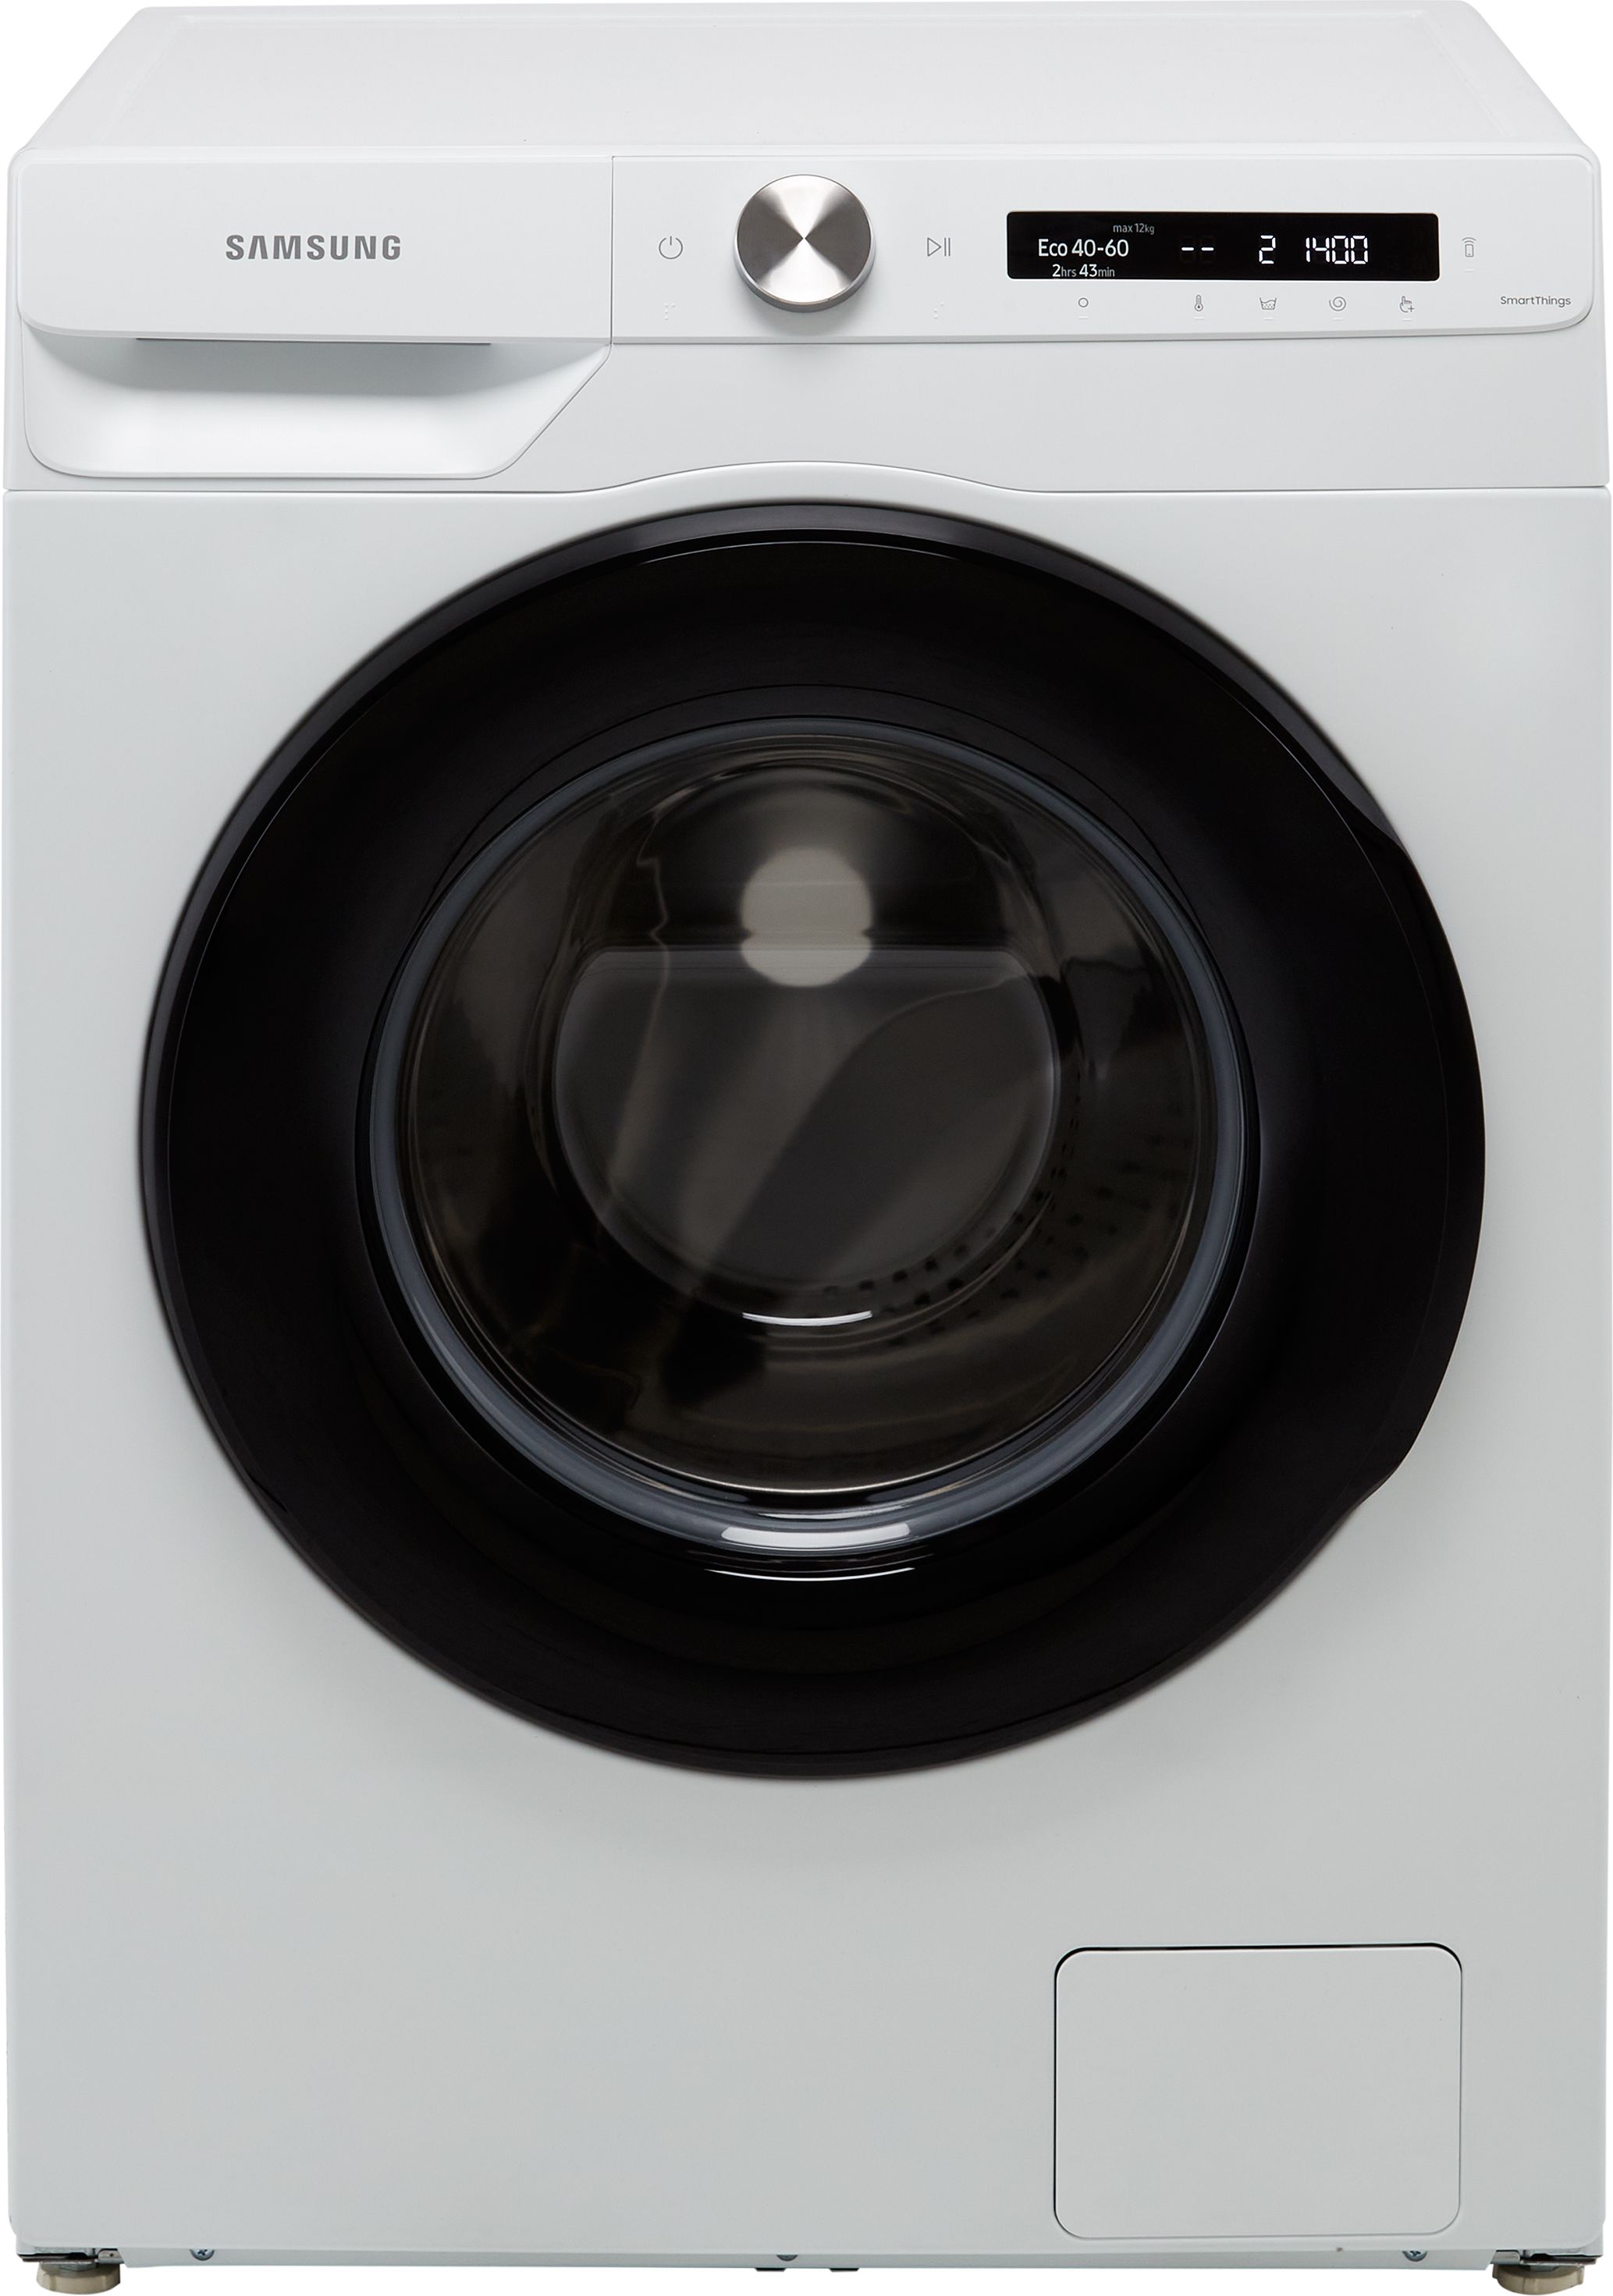 Samsung Series 5 ecobubble WW12T504DAW 12kg Washing Machine with 1400 rpm - White - A Rated, White